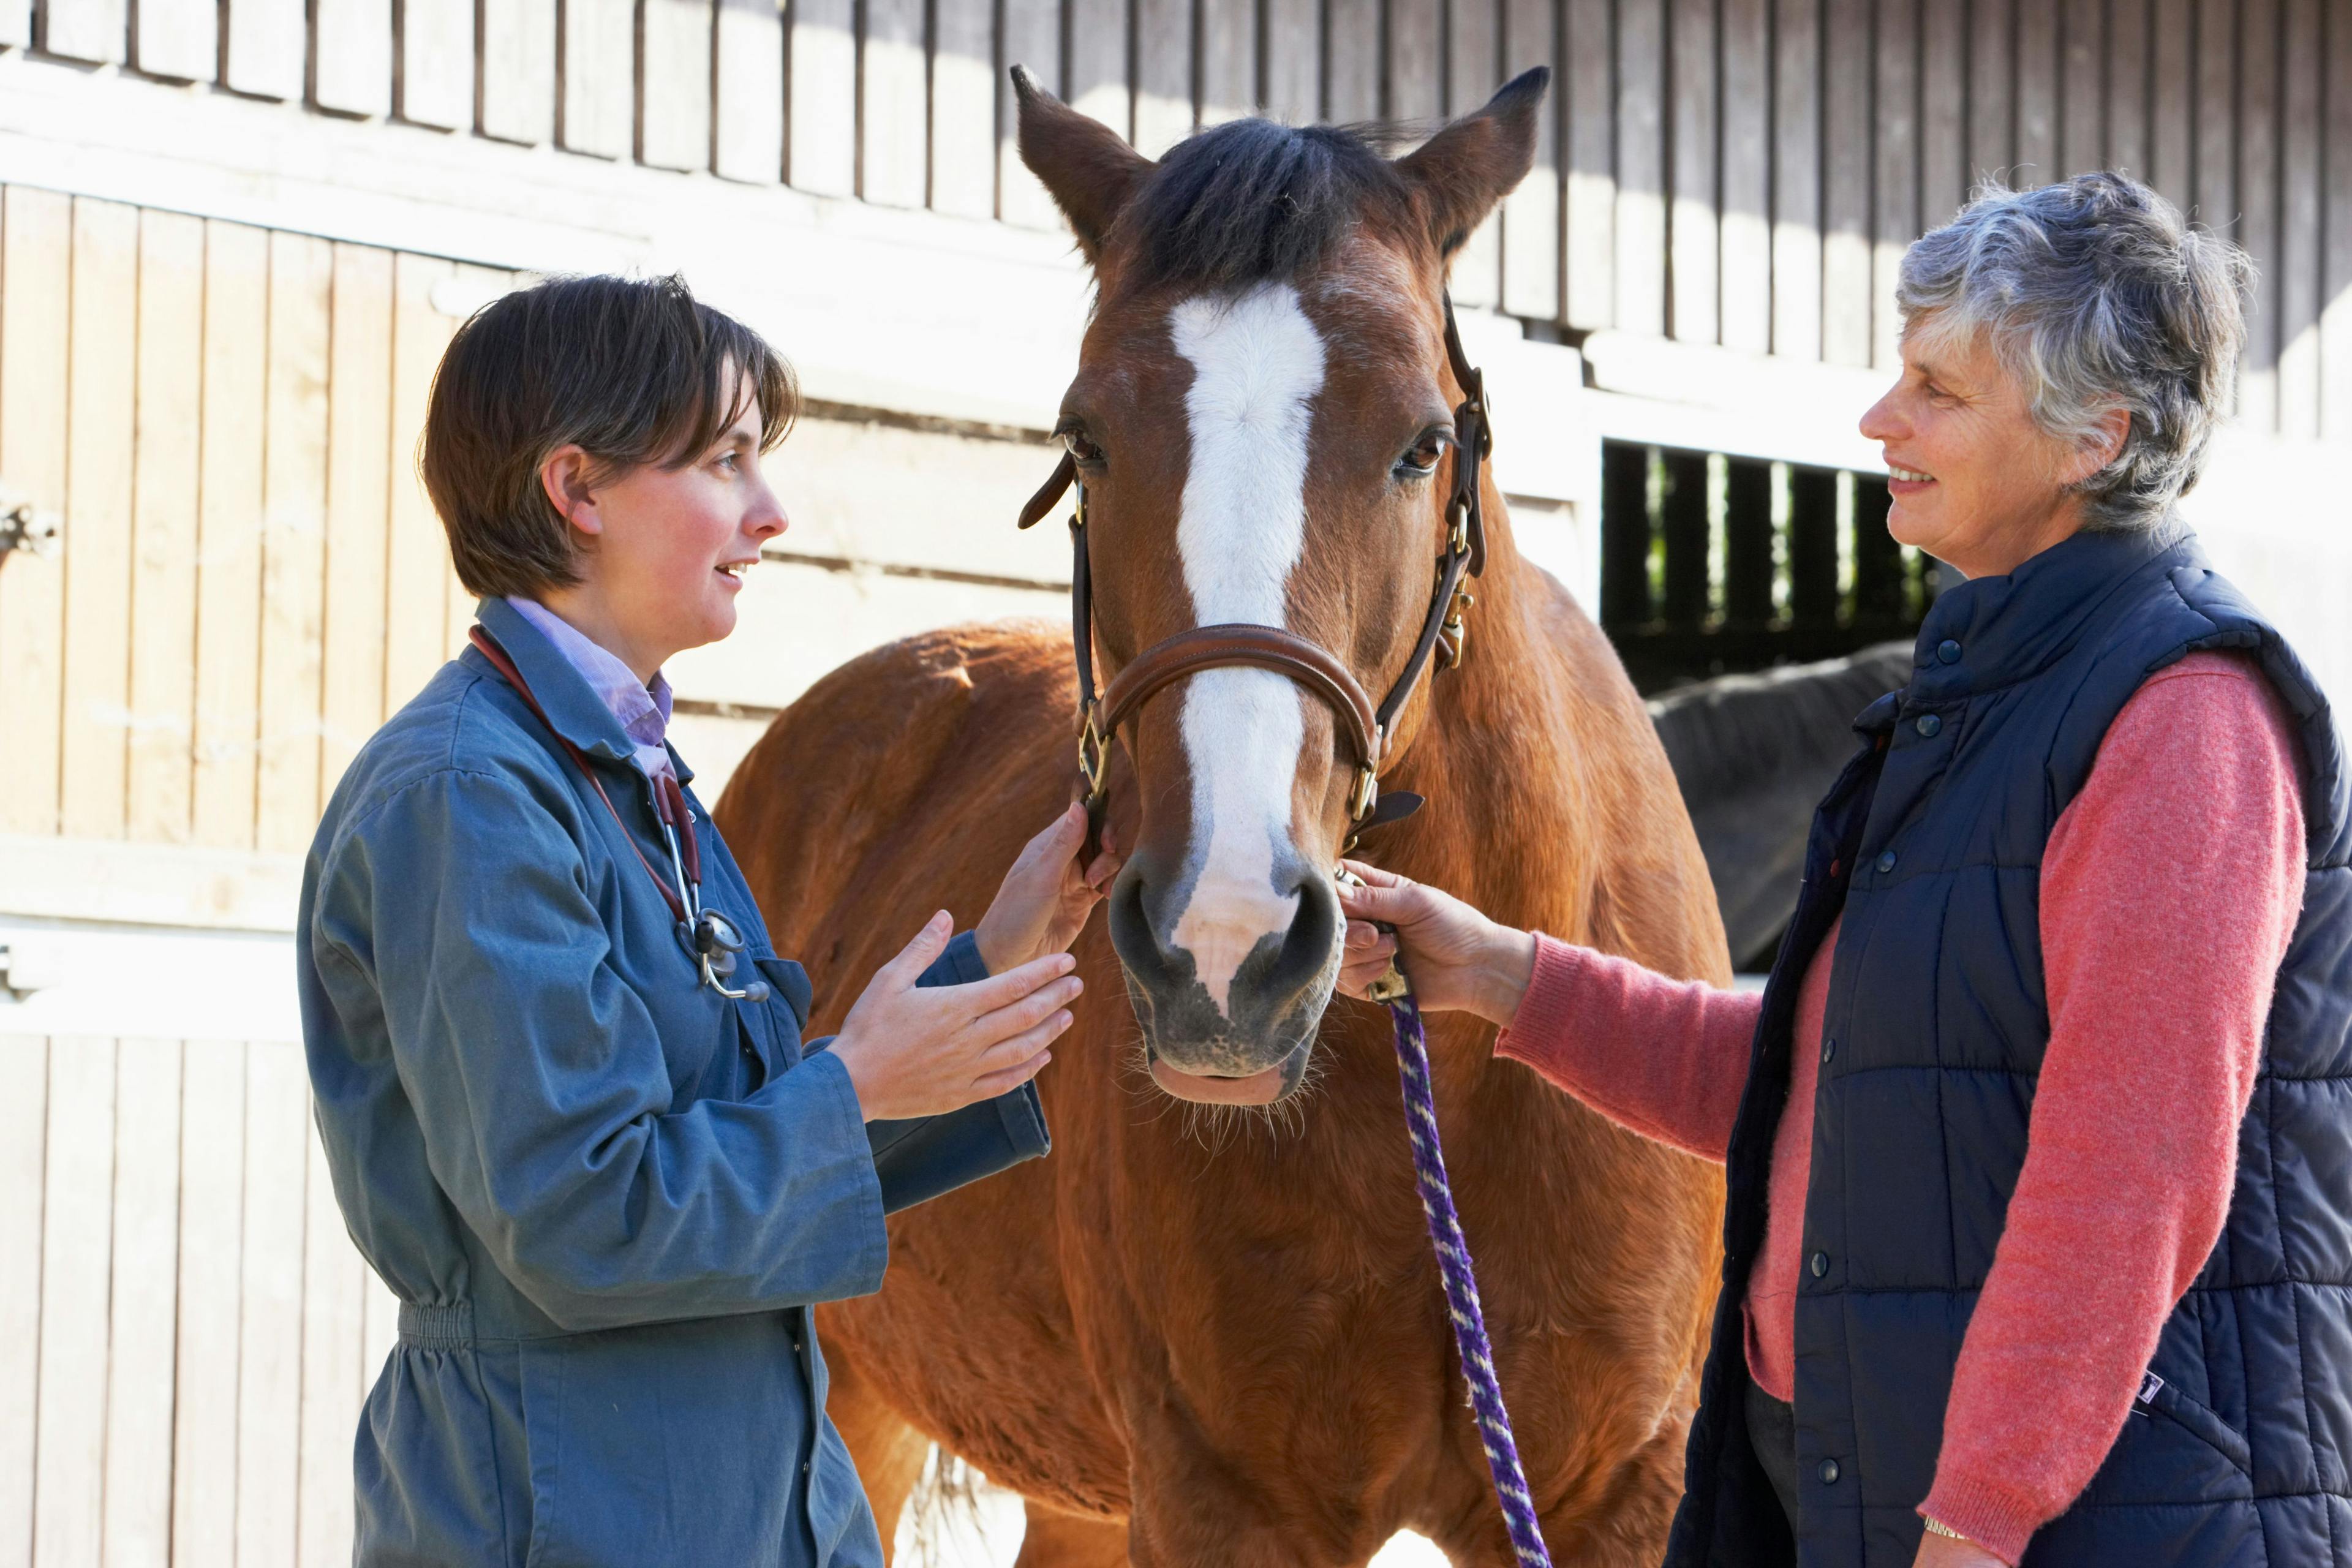 Morris Animal Foundation announces study looking at coping strategies in horses